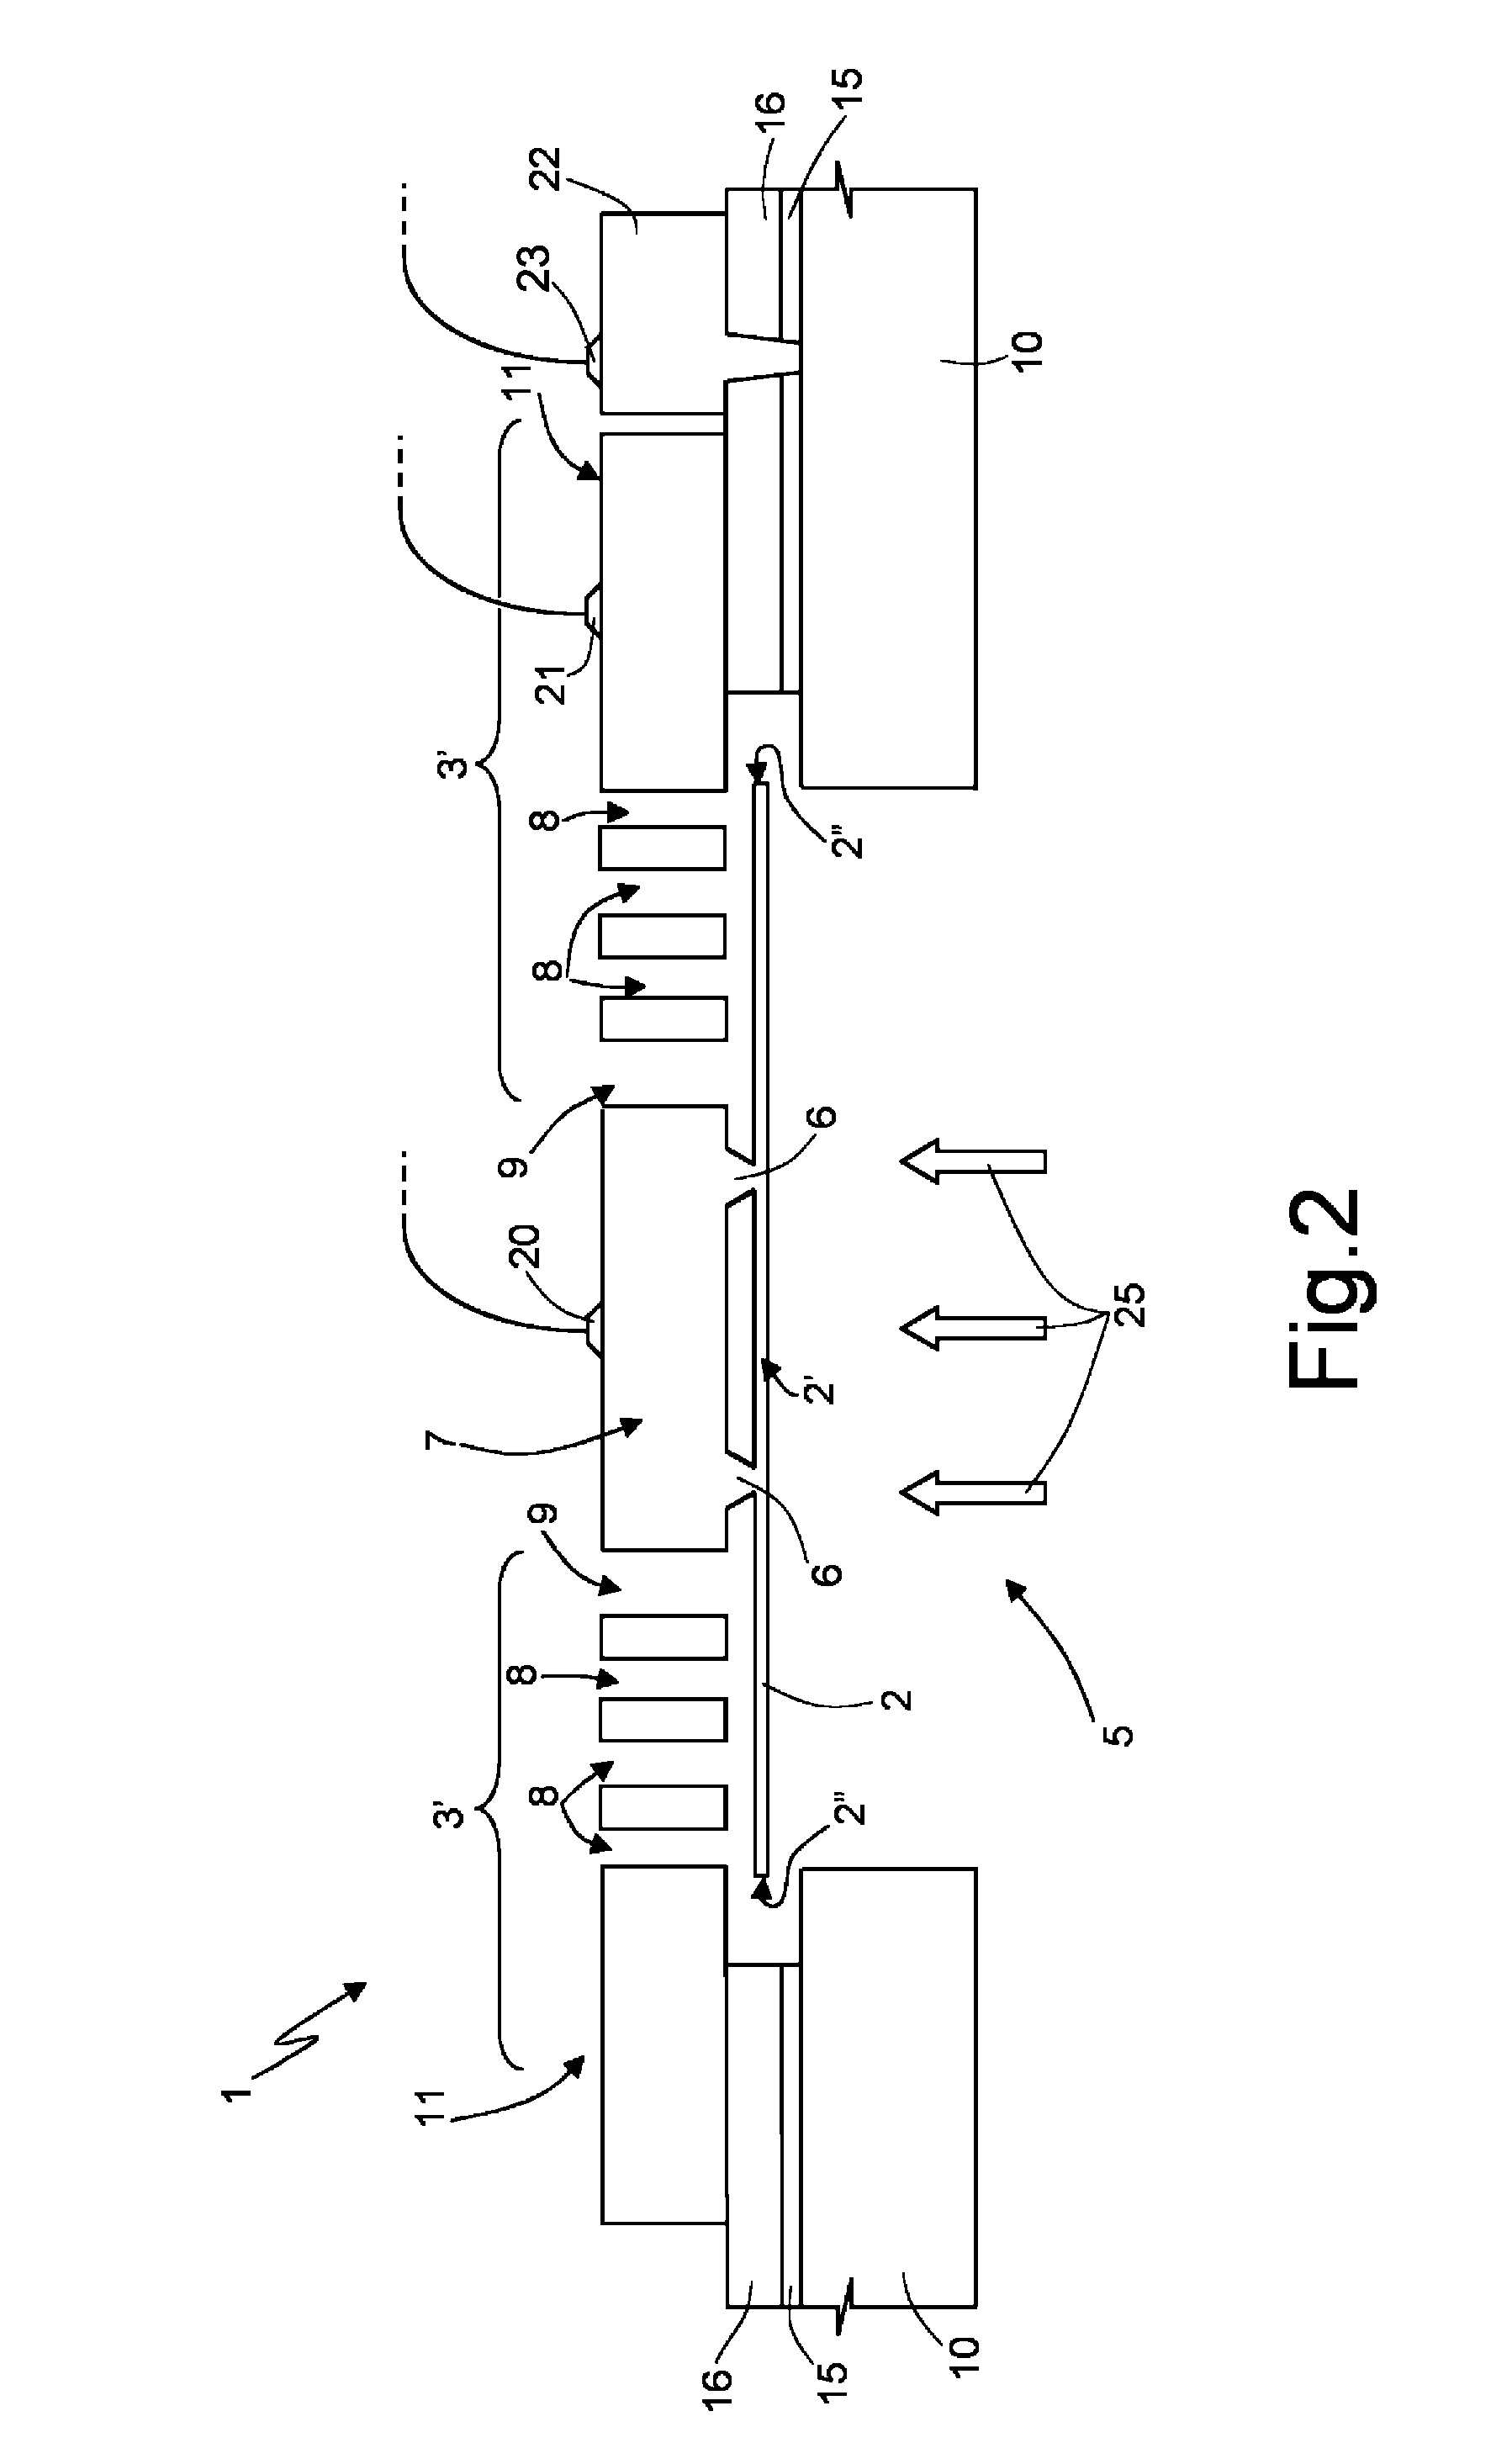 Integrated acoustic transducer in MEMS technology, and manufacturing process thereof